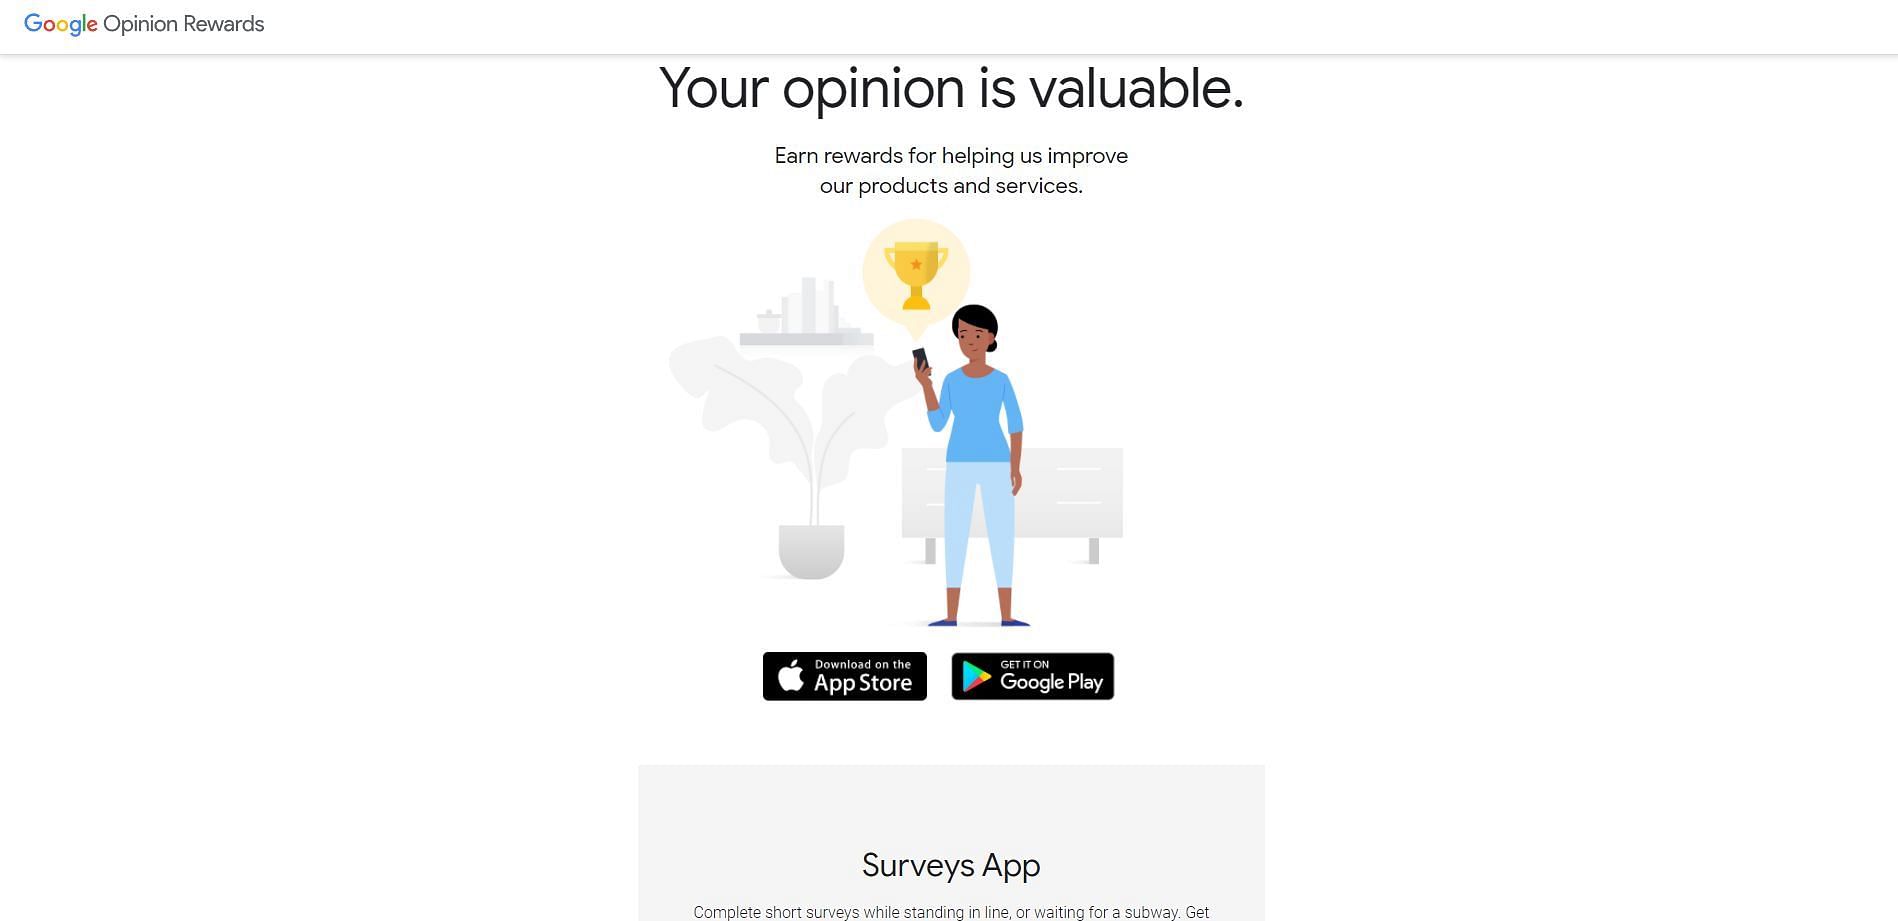 Google Opinion Rewards is the finest way for players (Image via Google Opinion Rewards)